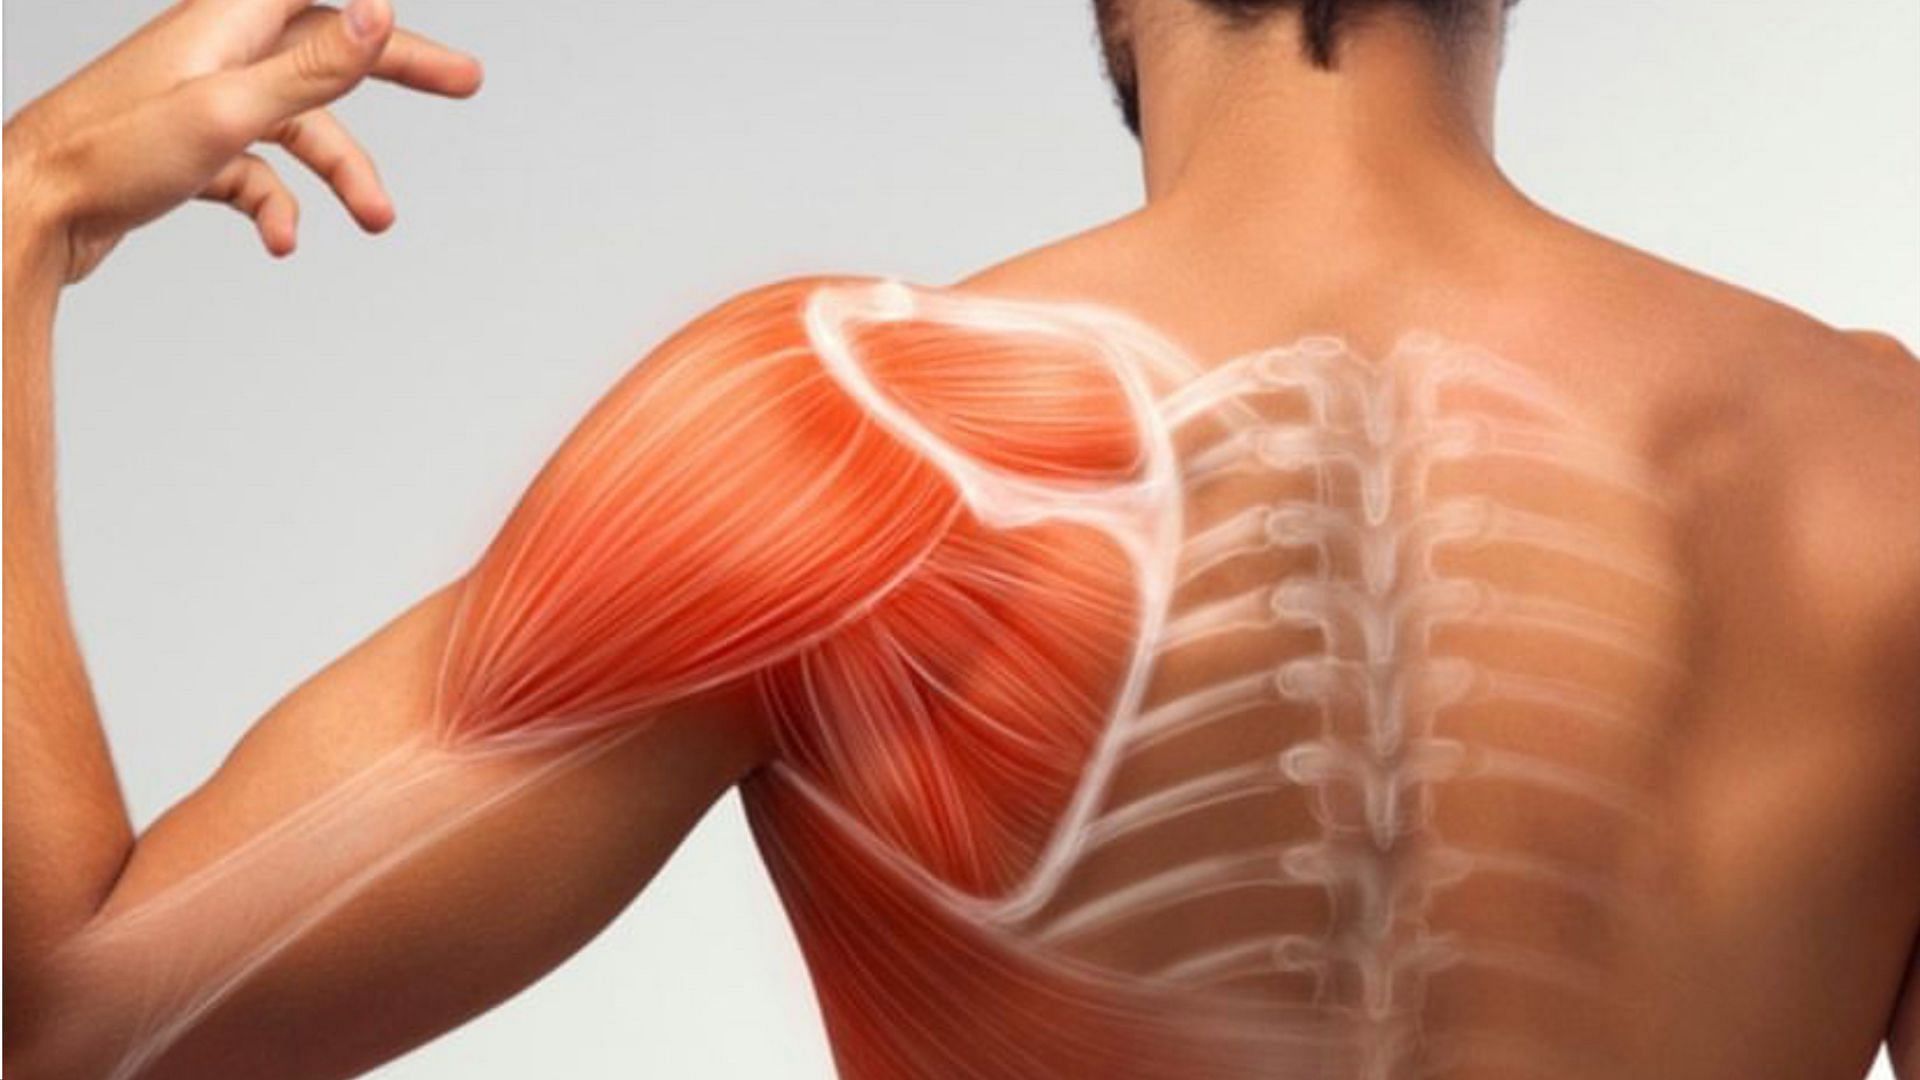 Injuries to rotator cuff muscles are quite common. (Photo via Instagram/ichiroclinics)